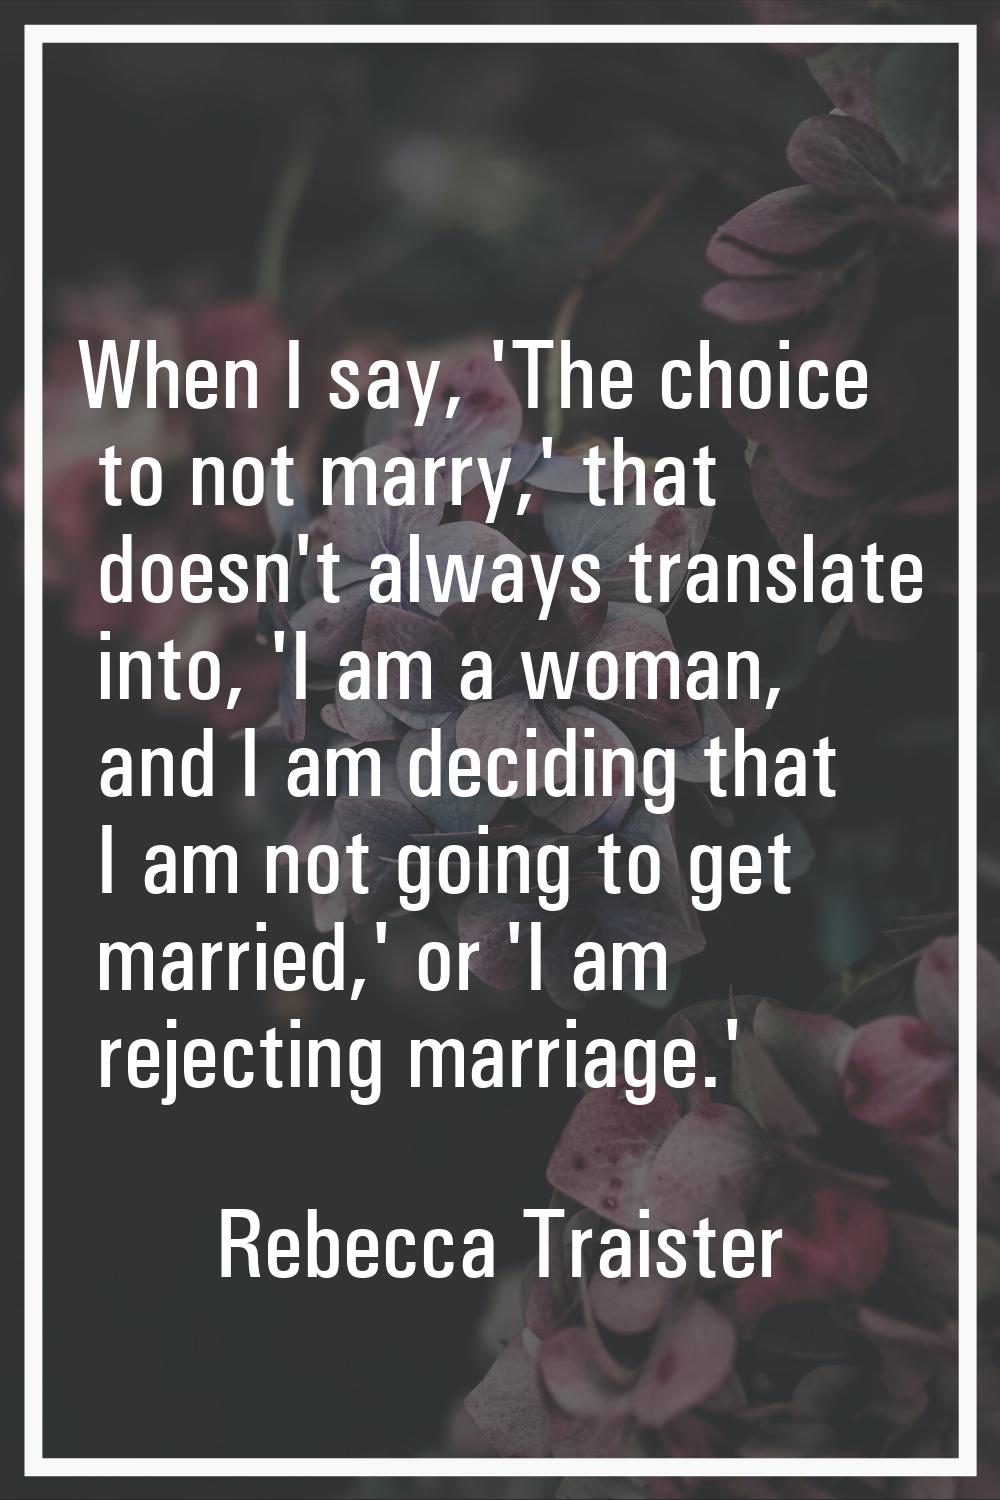 When I say, 'The choice to not marry,' that doesn't always translate into, 'I am a woman, and I am 